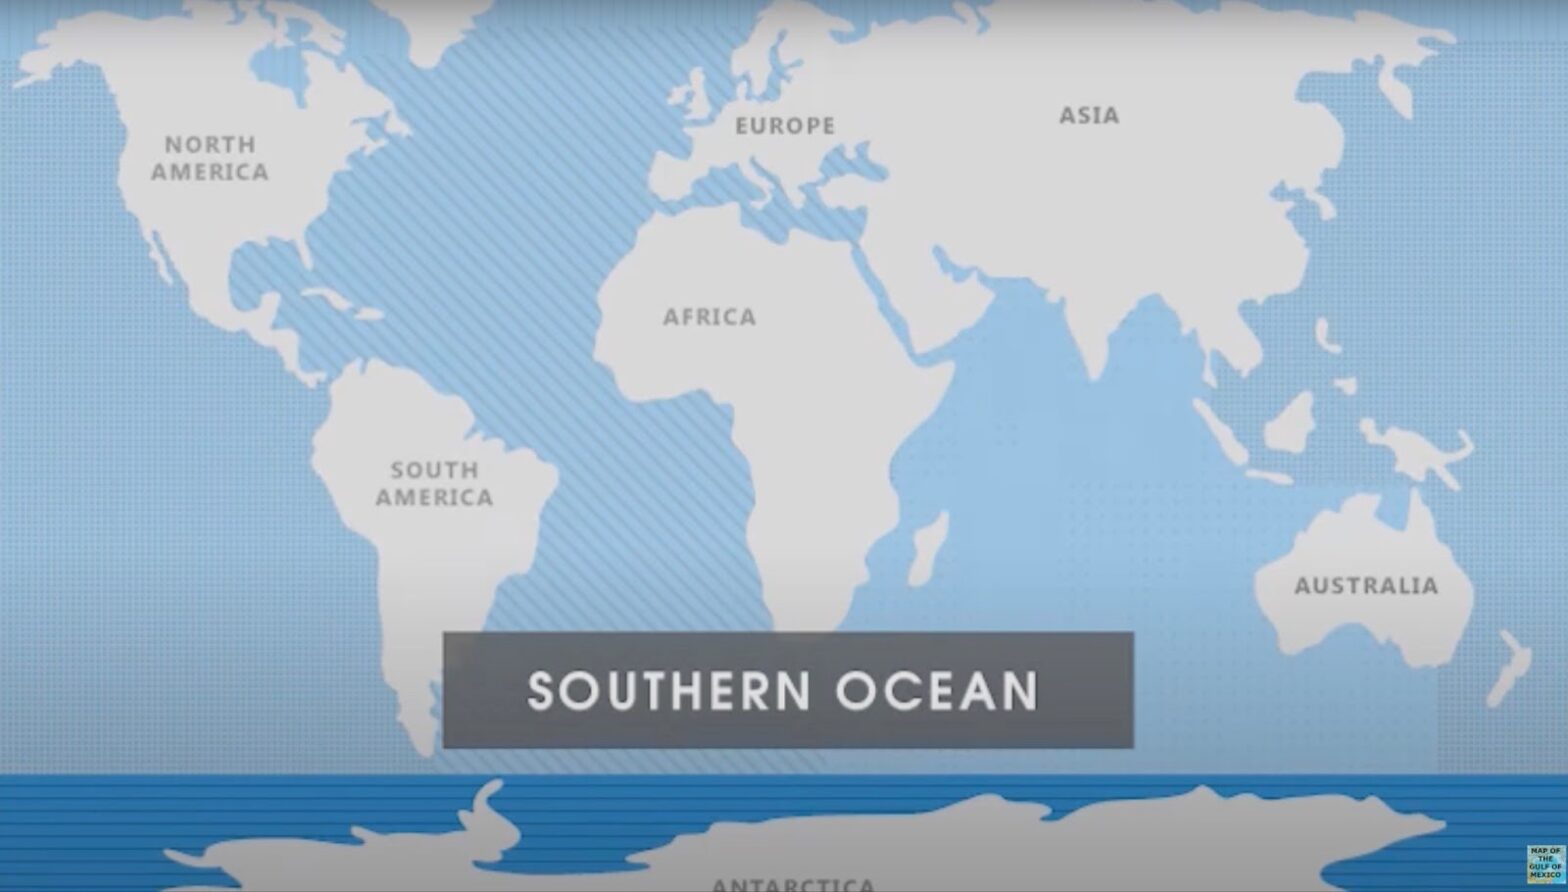 The Southern Ocean: An In-depth Map Analysis